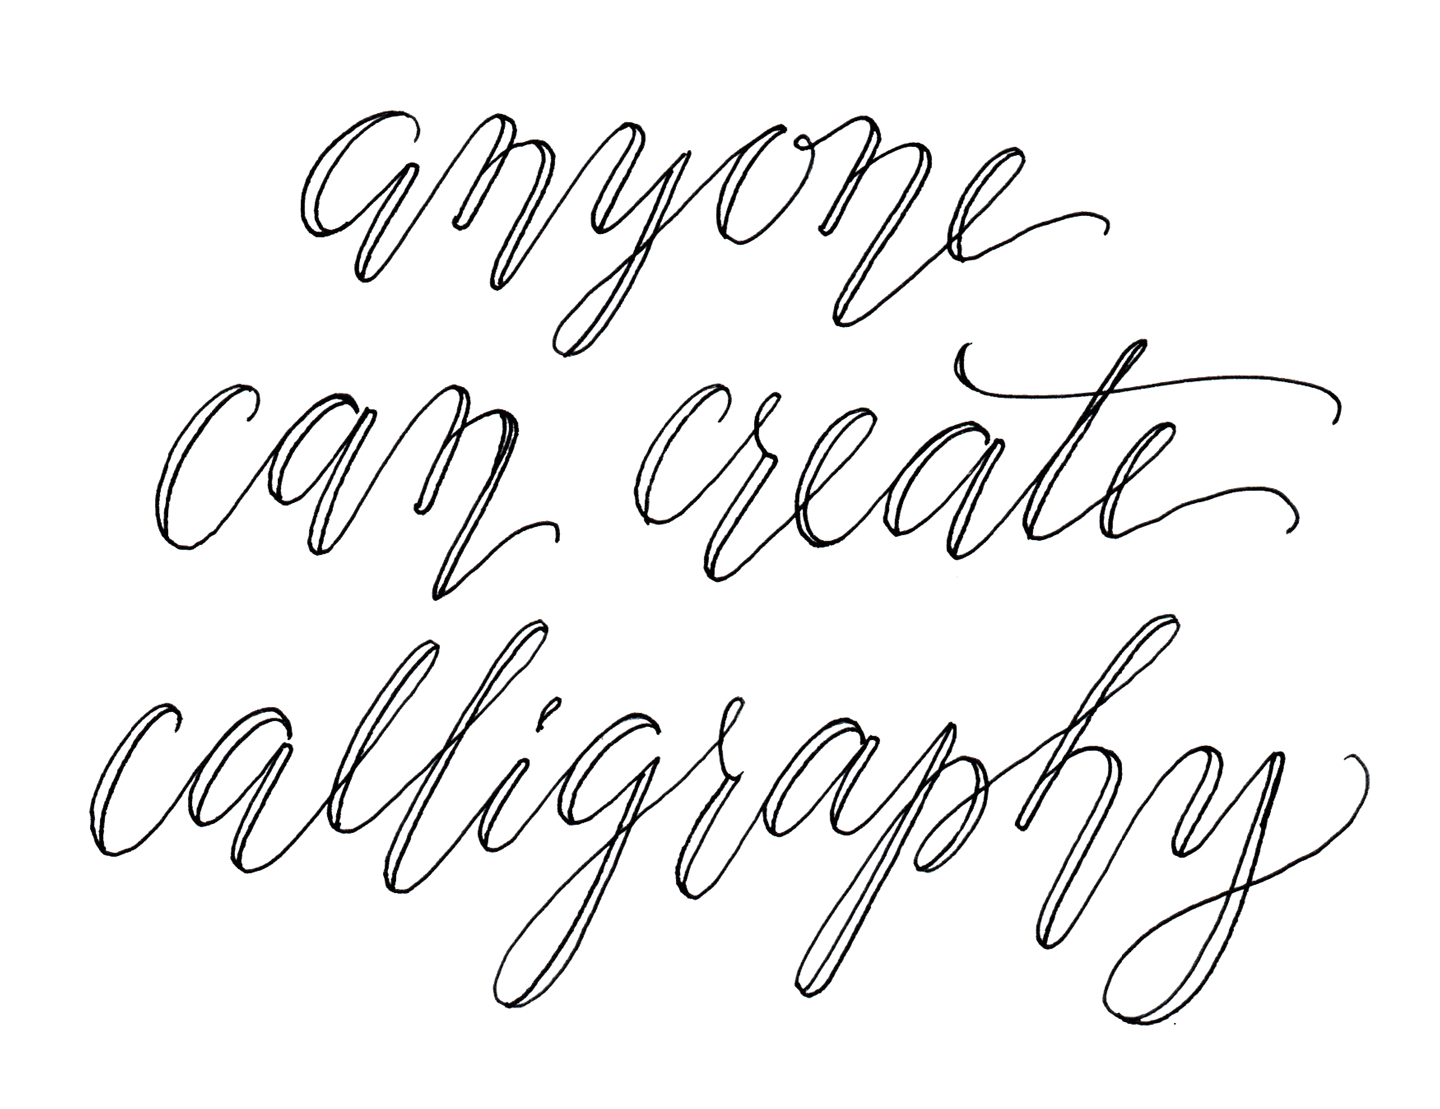 Cheating Calligraphy Tutorial | The Postman's Knock